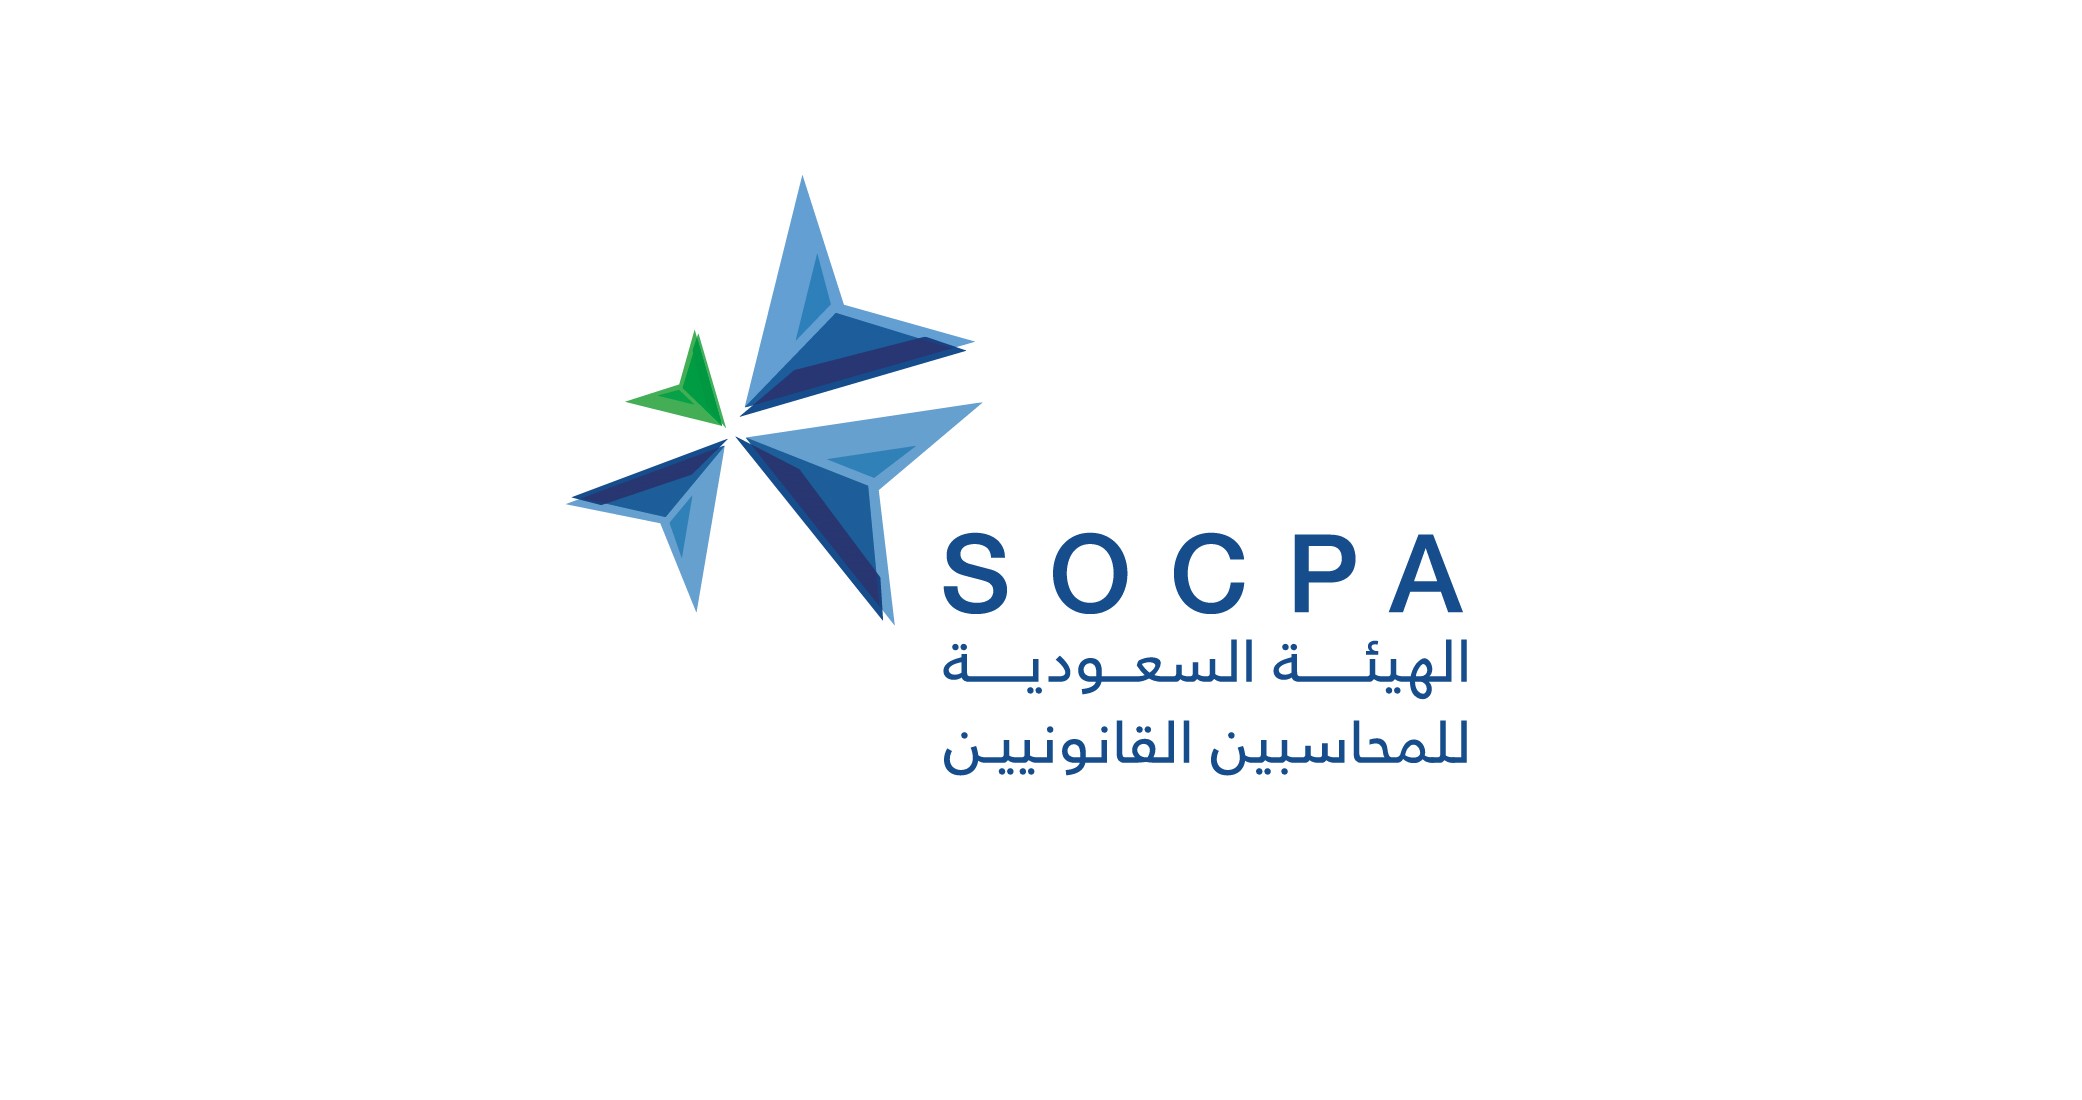 SOCPA makes its point in one of the decisions of the international standards explanations Committee on training costs associated with contracts with clients